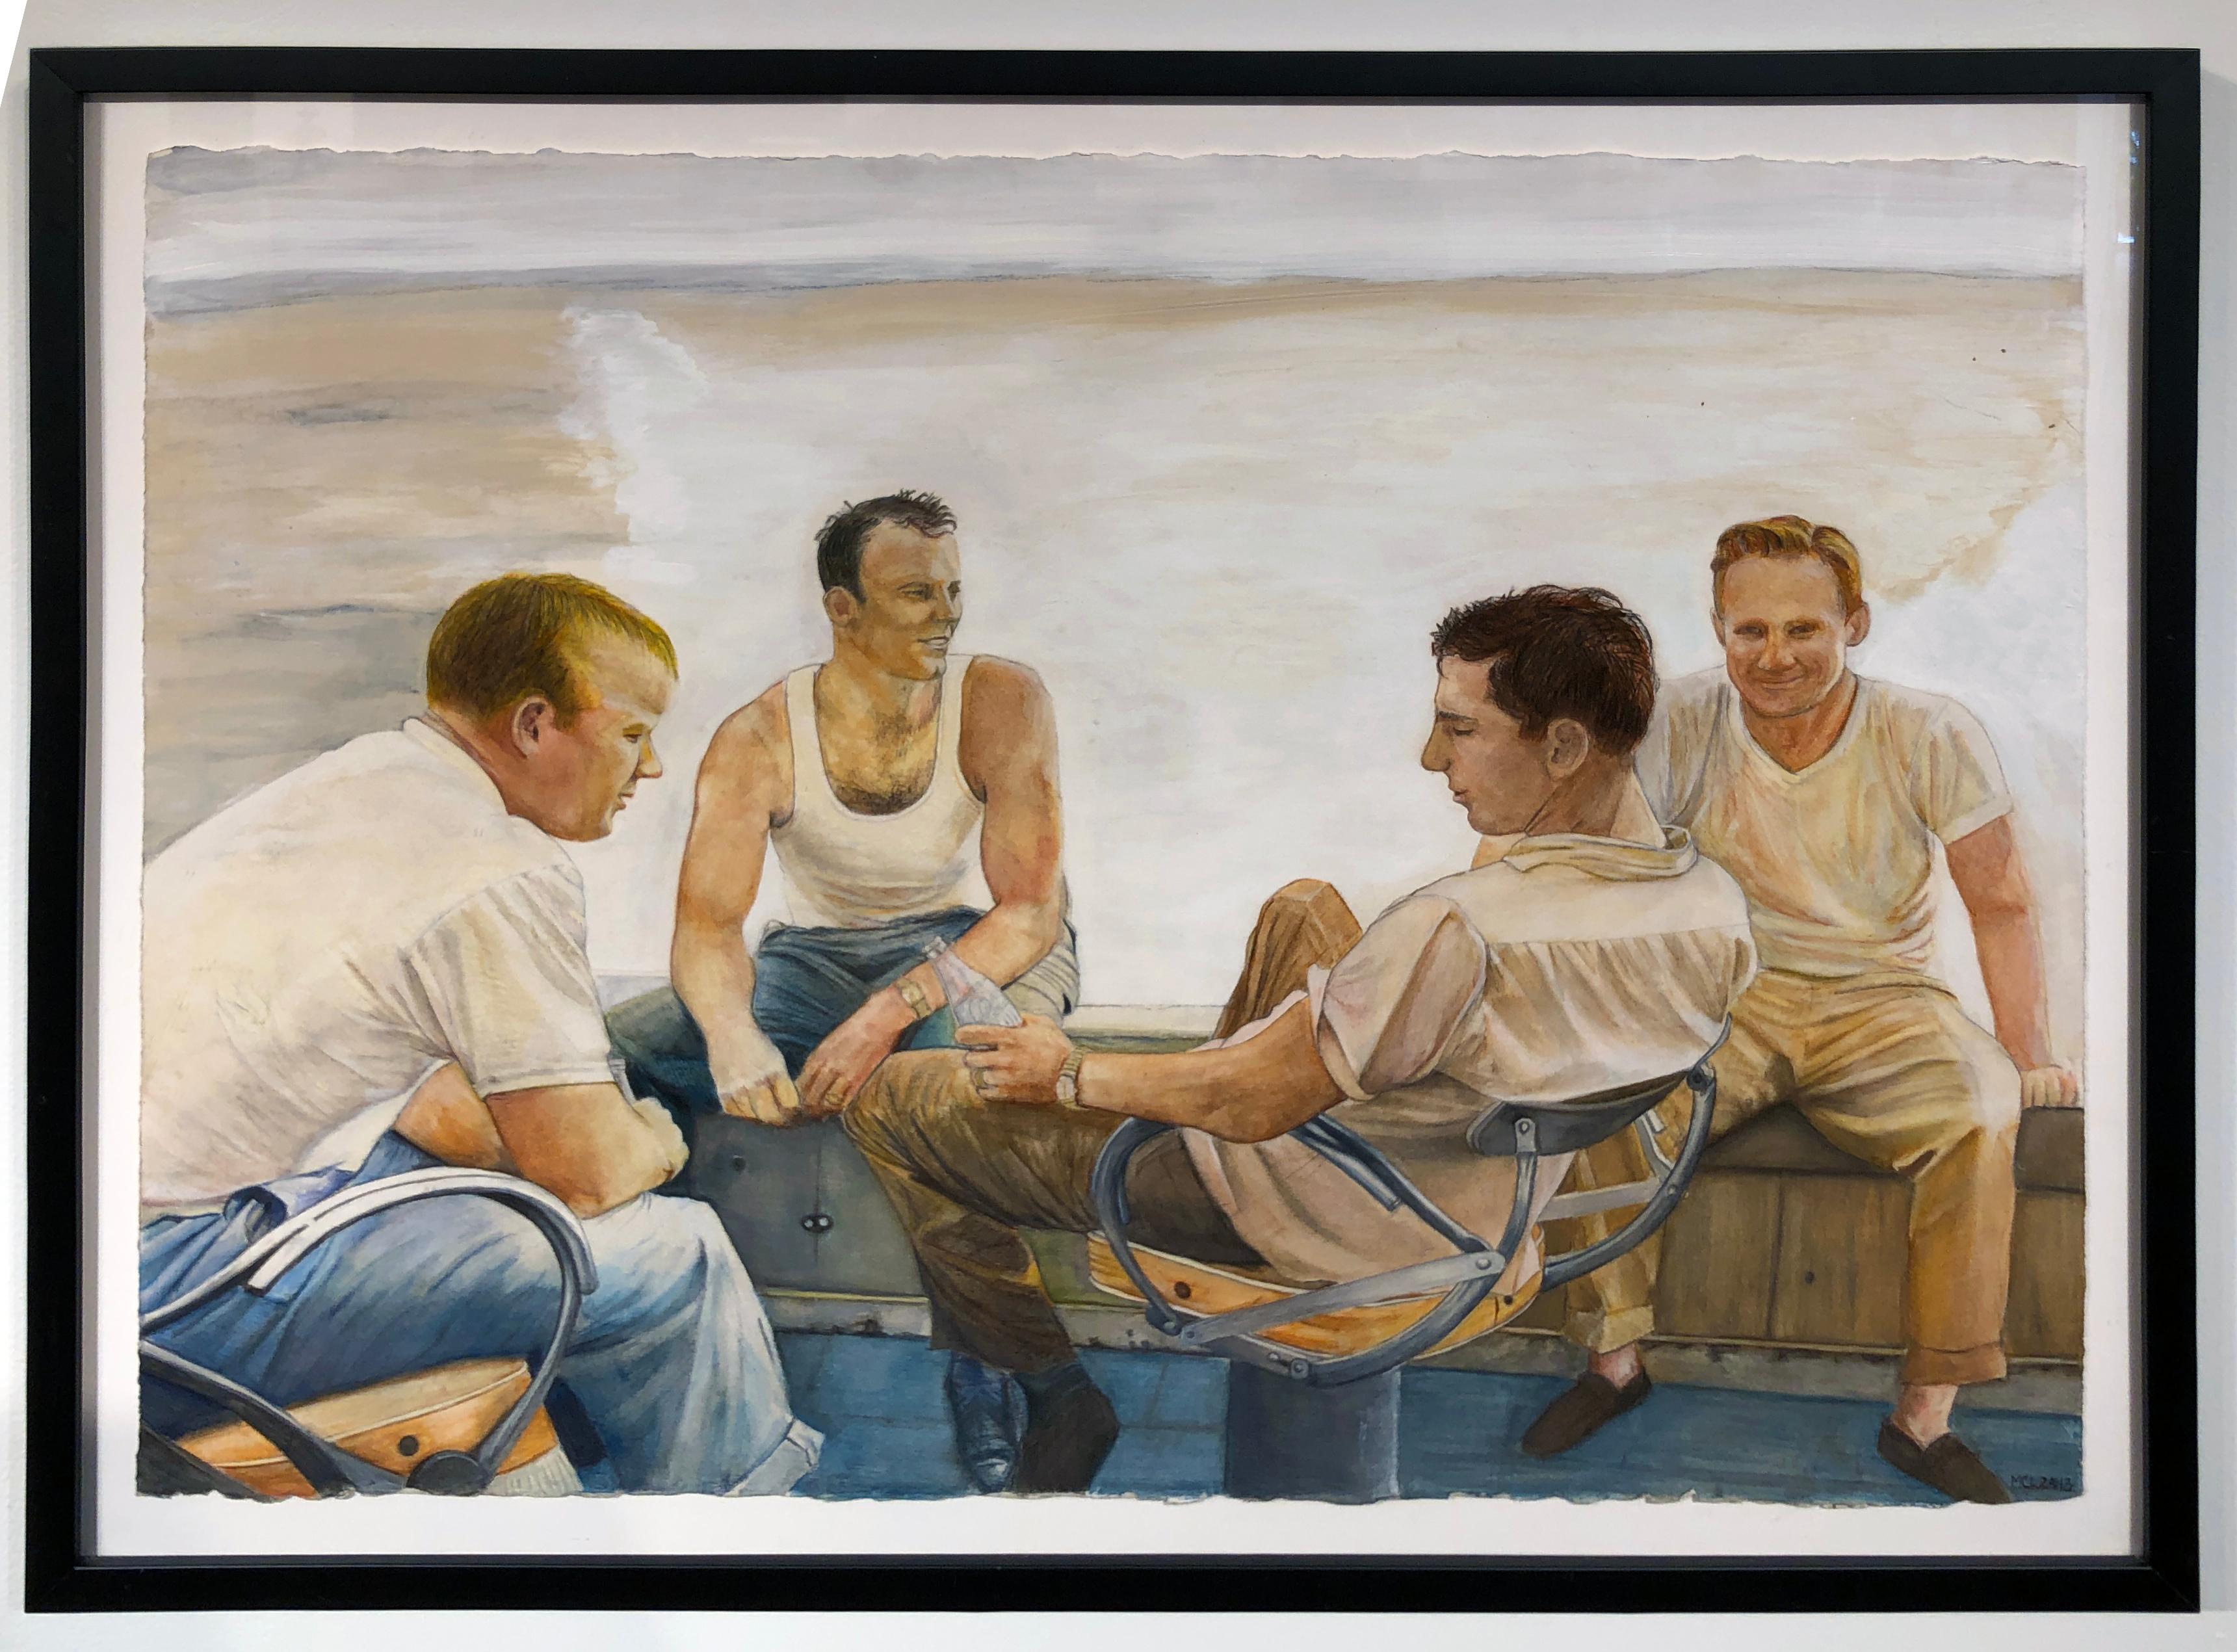 Yankees Spring Training 1957 - Baseball Greats, Mantle, Grimm, Martin, Ford - Painting by Margie Lawrence